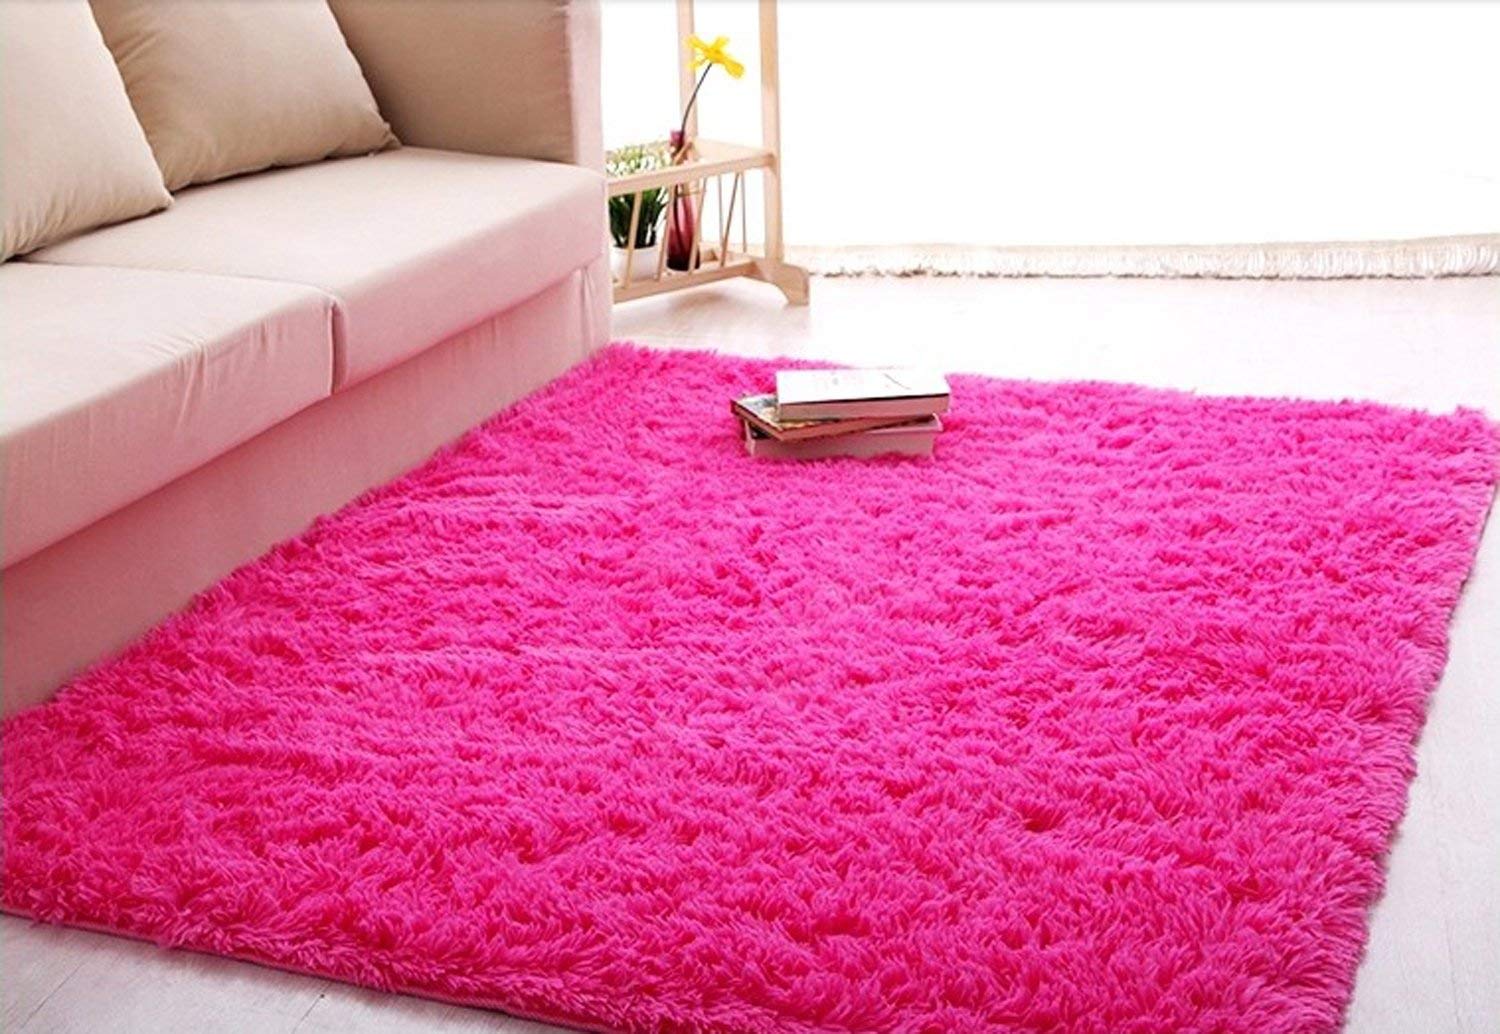 pink area rugs amazon.com: forever lover soft indoor morden shaggy area rug pad, 2.5 x OORKUUI